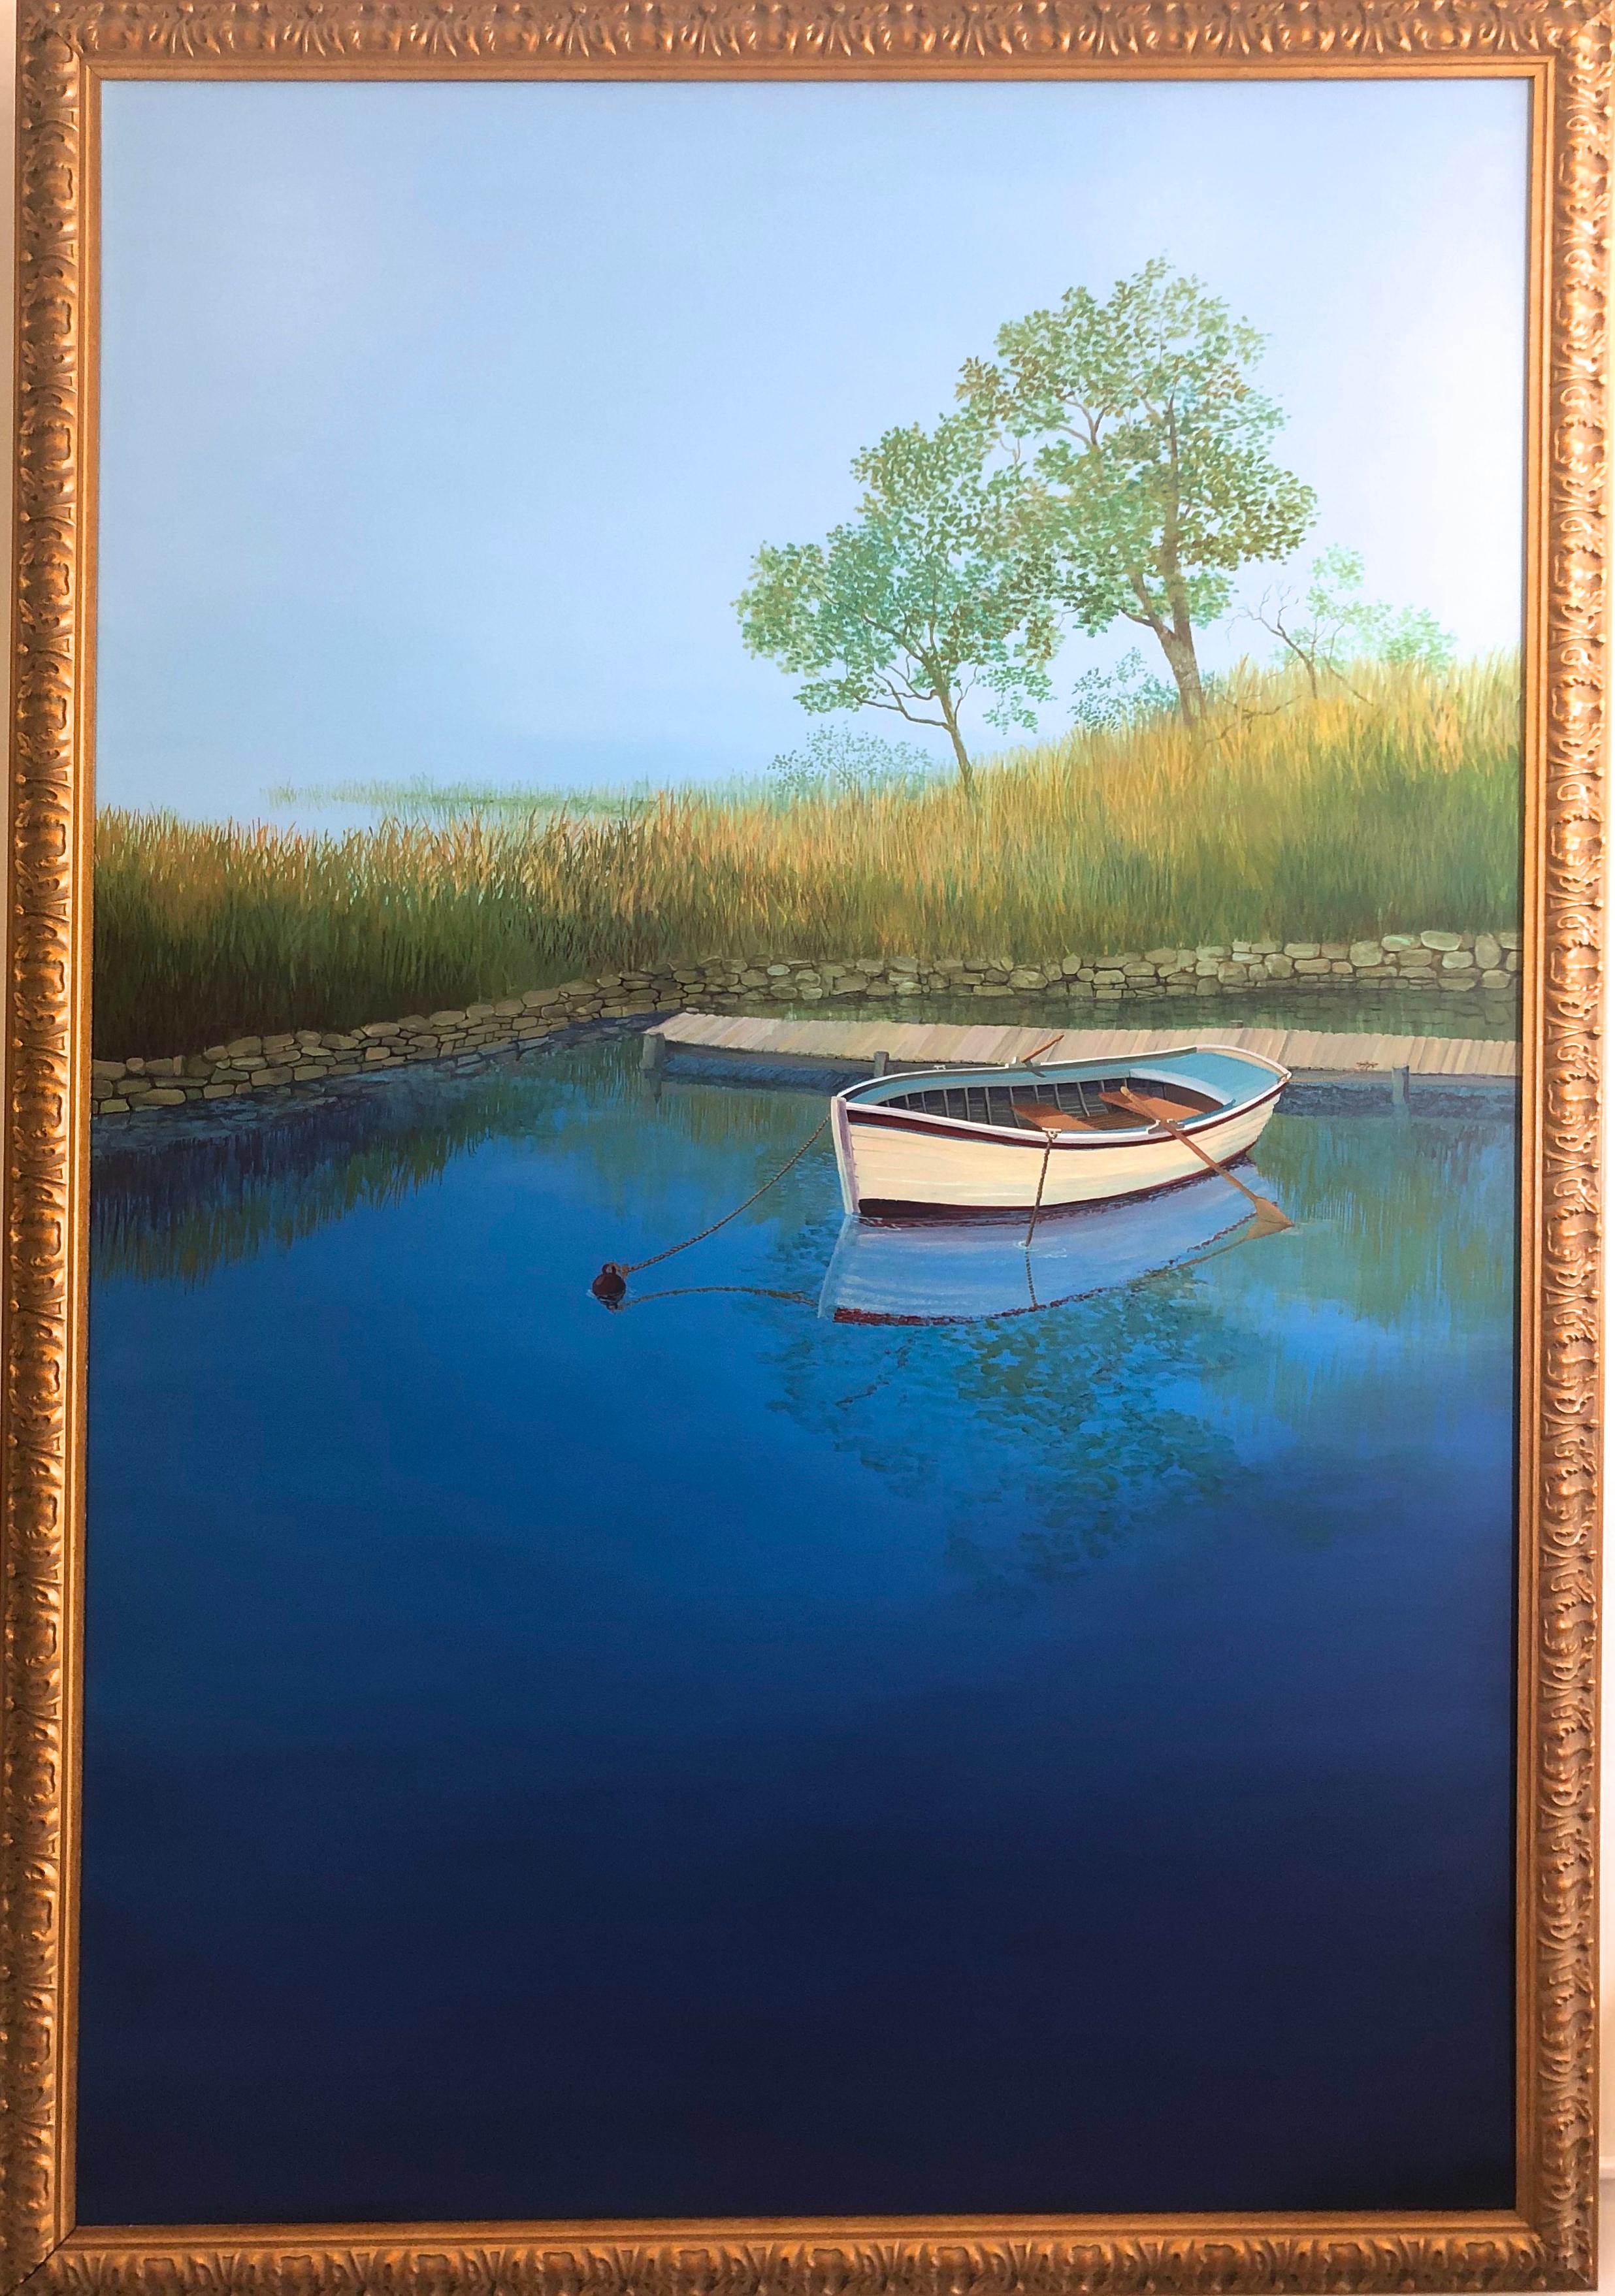 Unknown Landscape Painting - Blue Landscape With Boat On The Lake Large